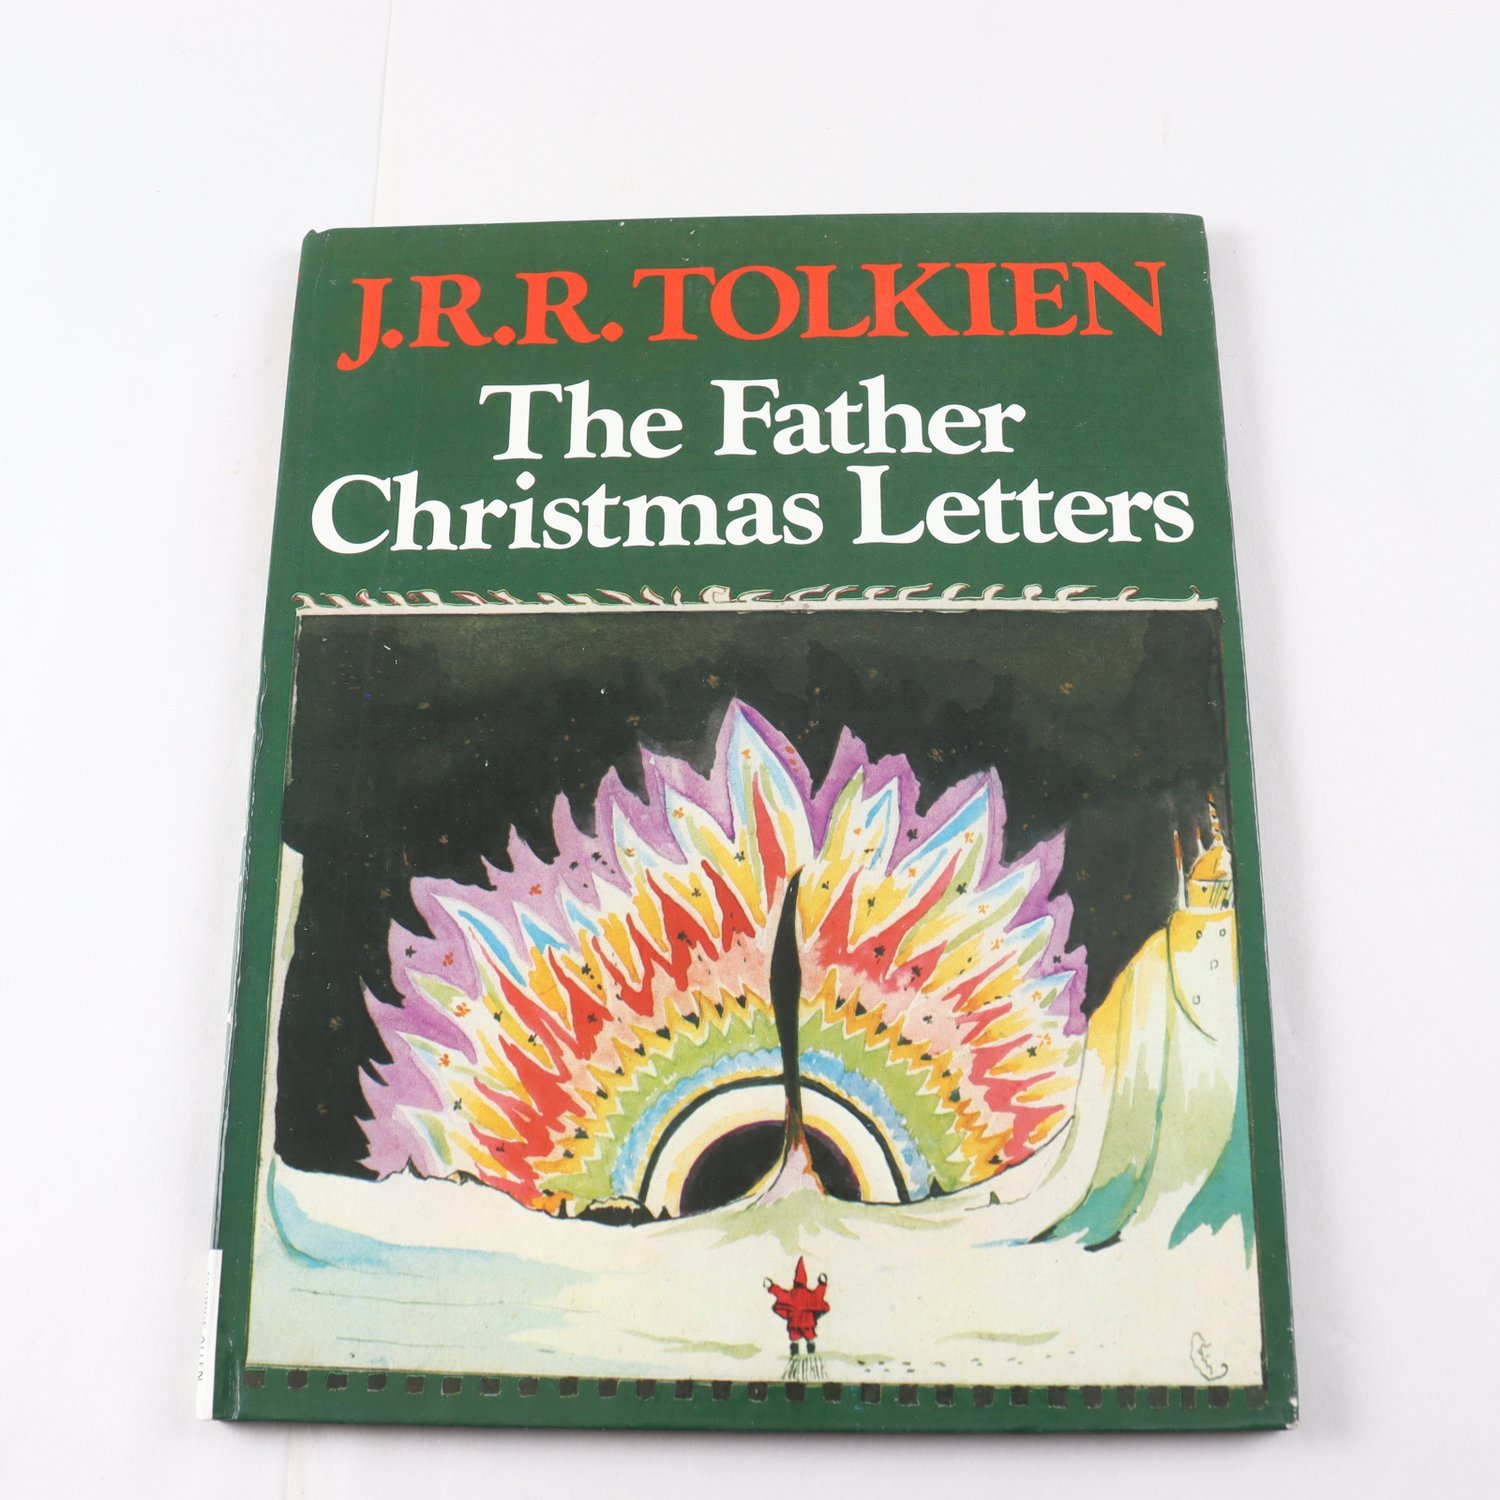 J.R.R. Tolkien, The Father Christmas Letters (1st edition, 2nd impression 1976)